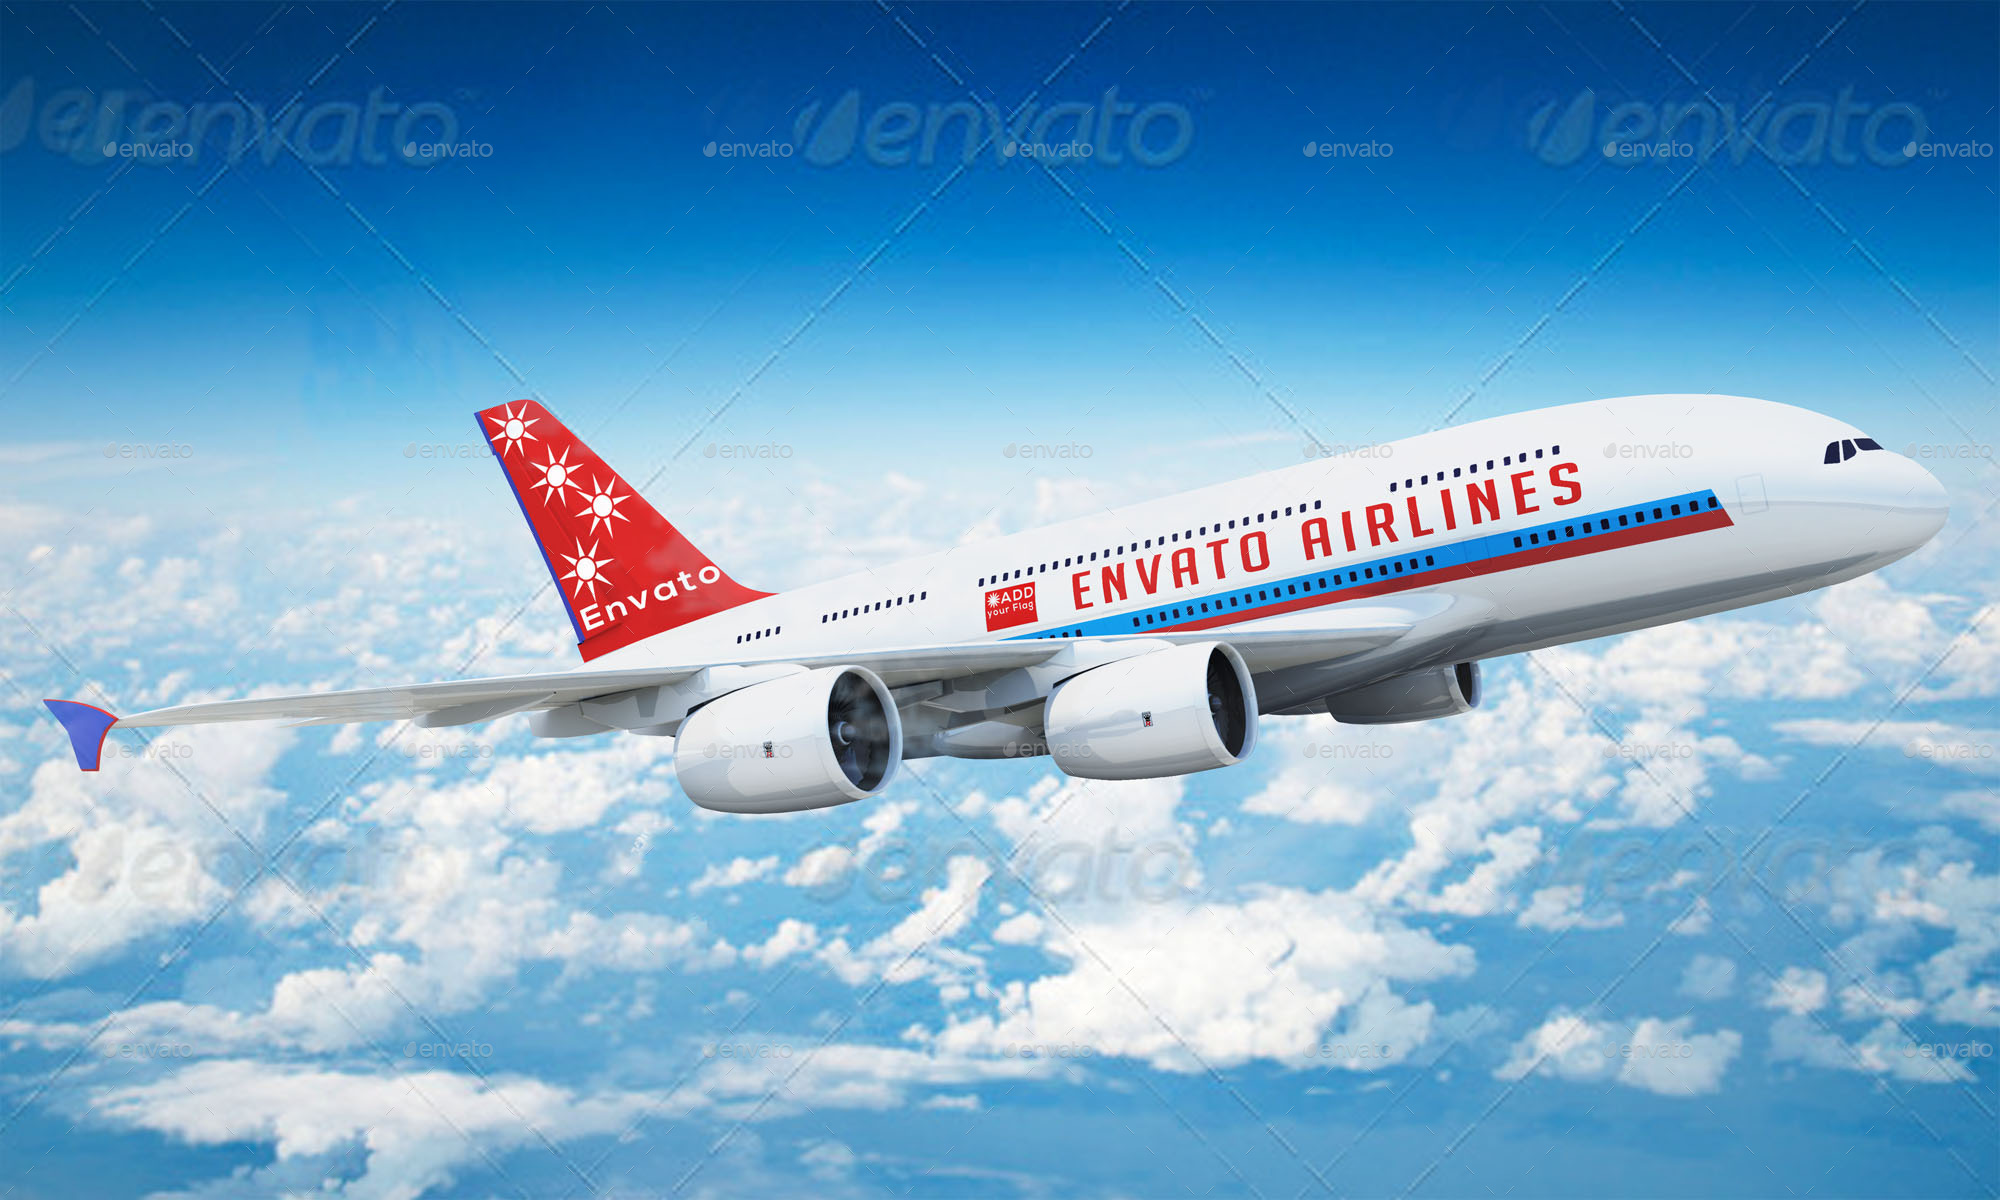 Download Airplane Advertising Mockup - A380 by Njanimator ...